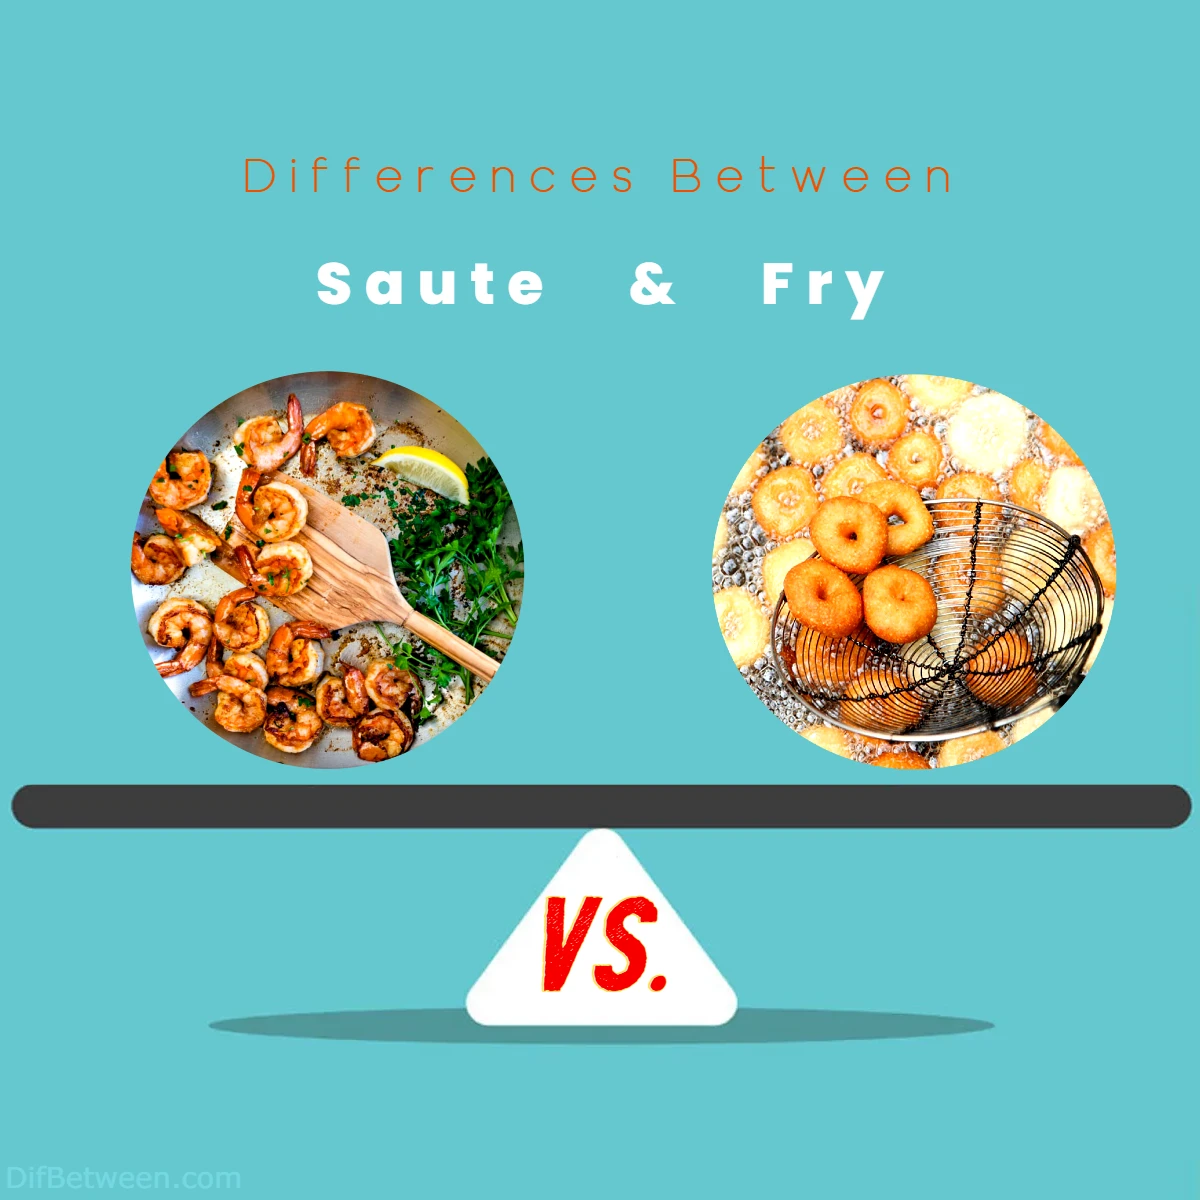 Differences Between Saute vs Fry